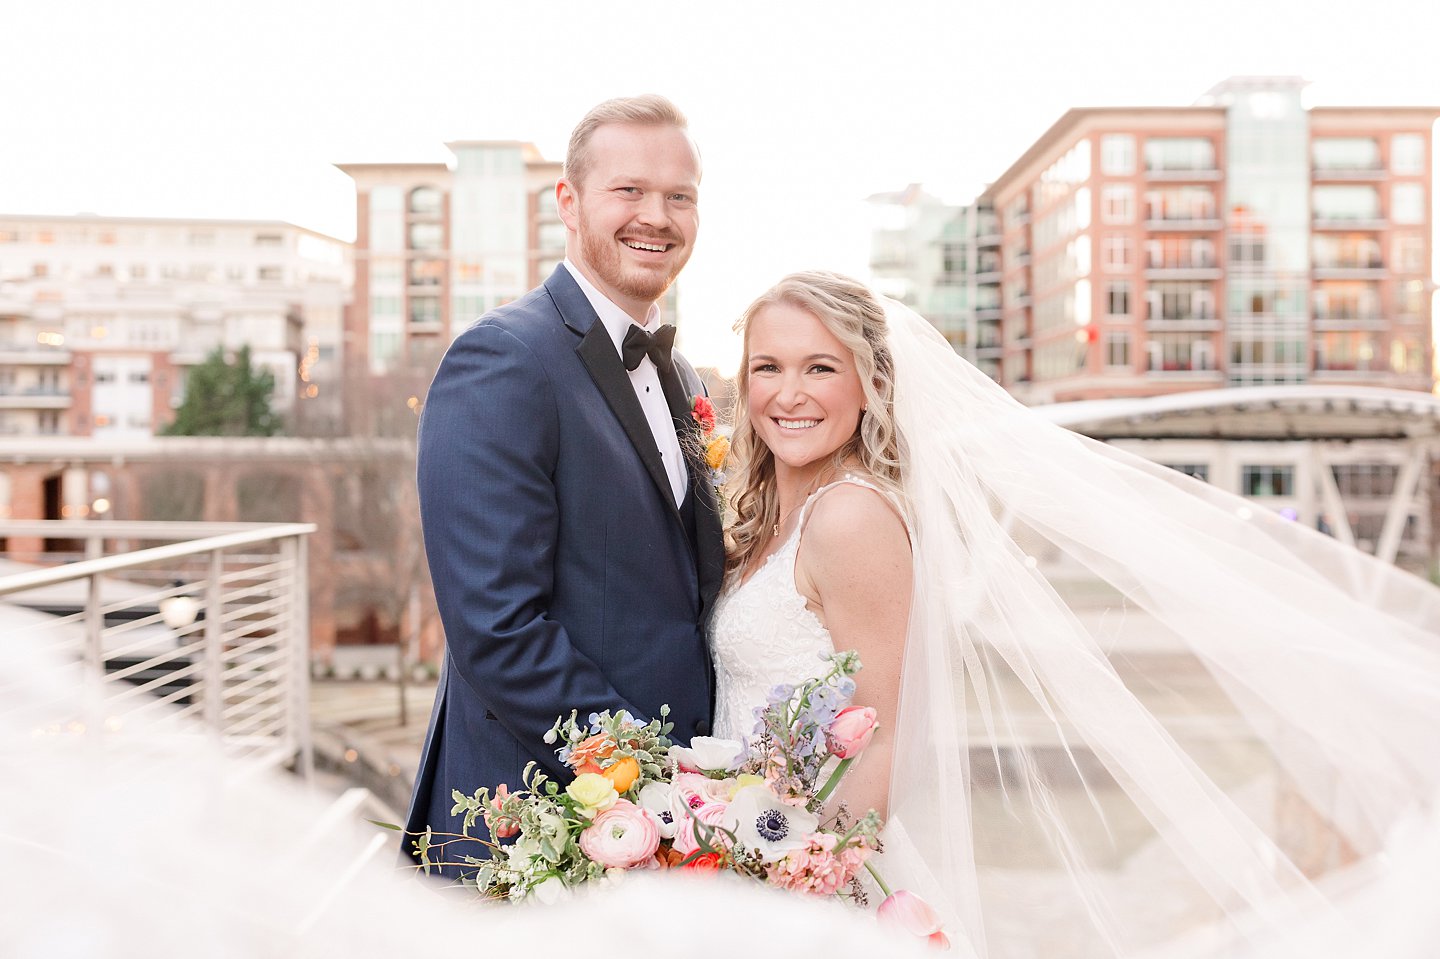 downtown Greenville bride and groom portrait with veil flying